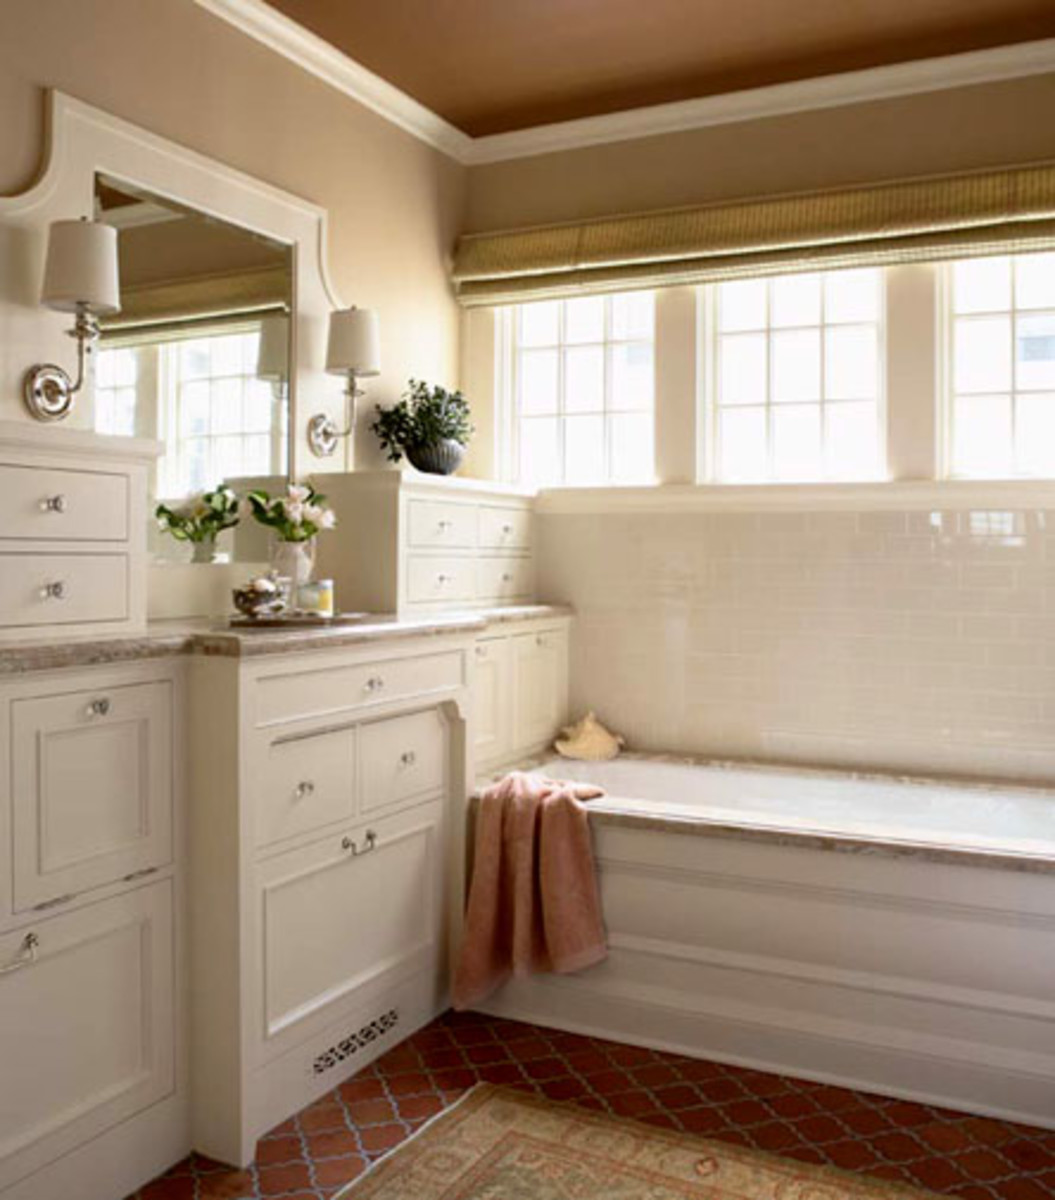 The rest of the bathroom, too, has a built-in, furnished look. Photo by Susan Gilmore.